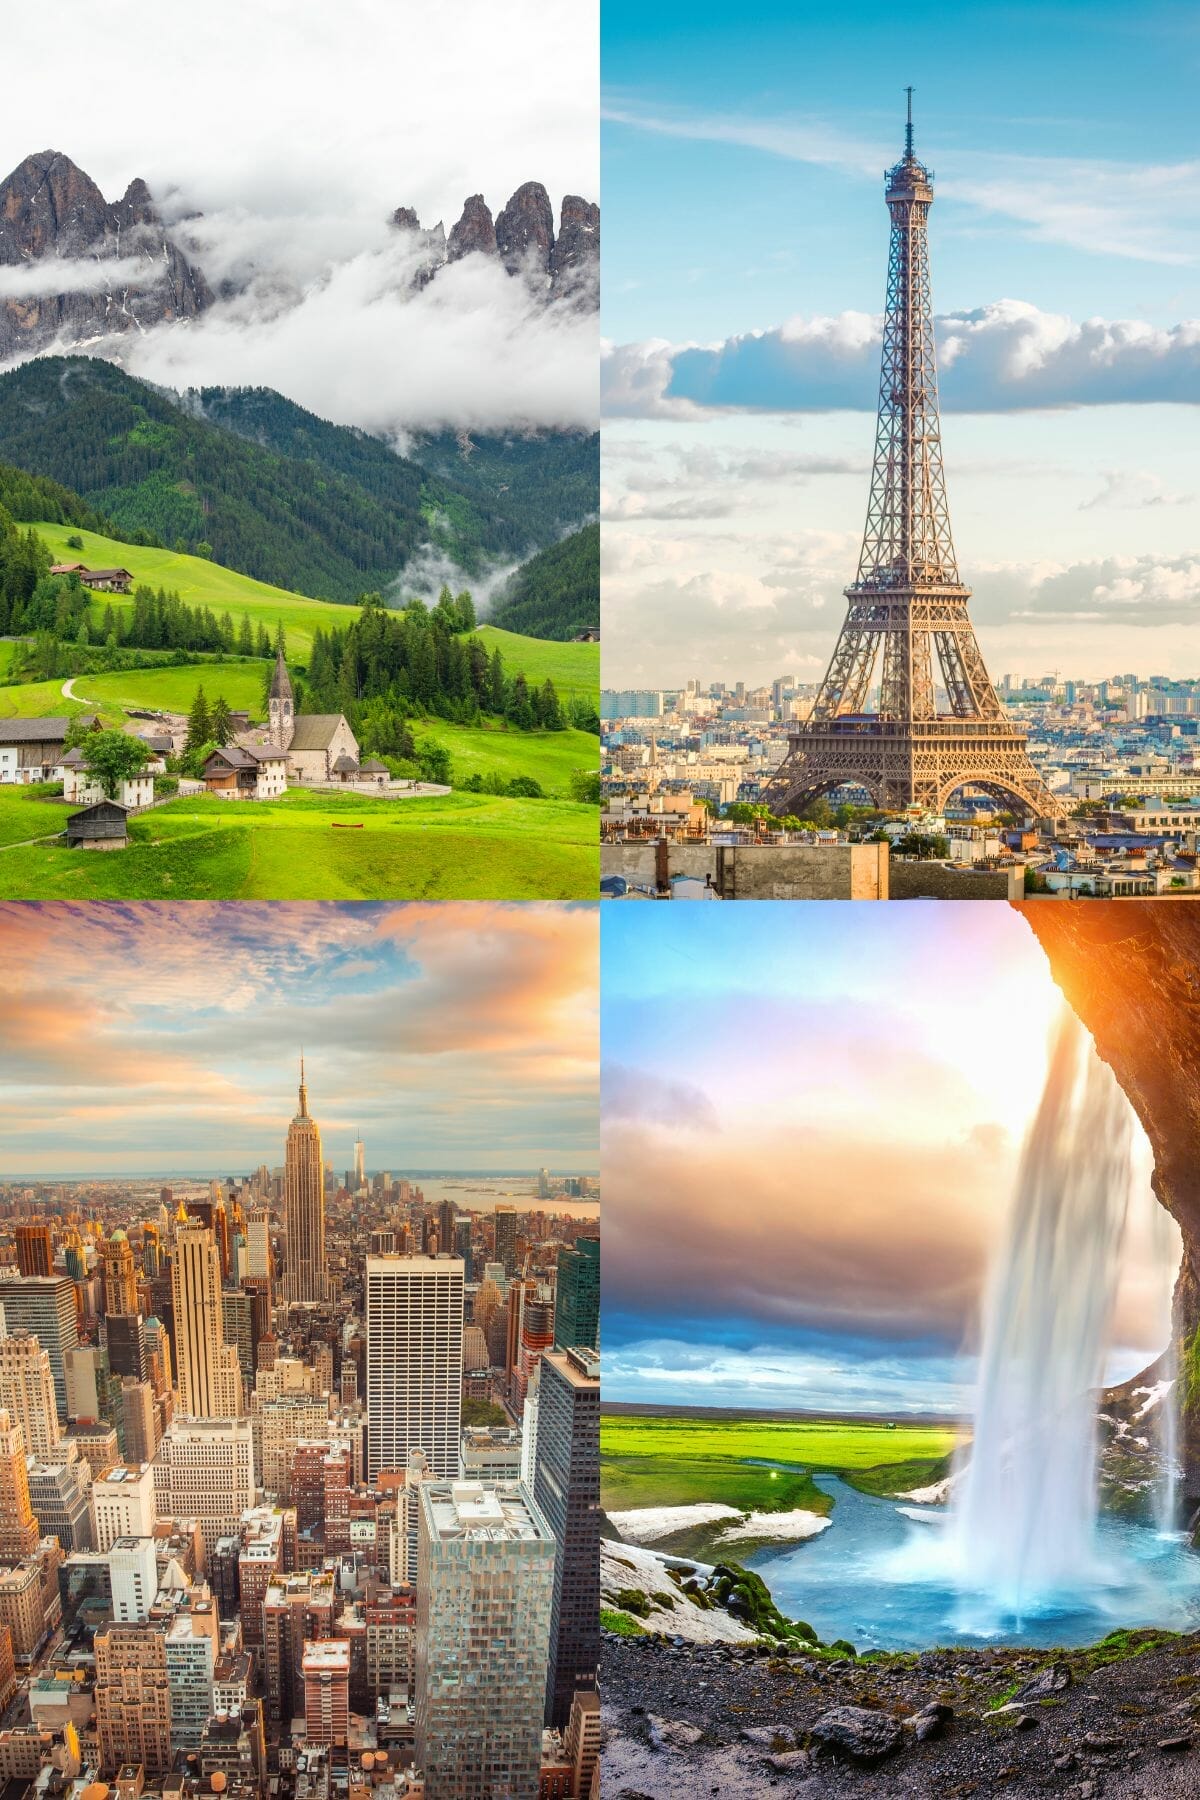 Dream Destinations of the World - Church in the Dolomites, Eiffel Tower, NYC skyline, and waterfall in Iceland